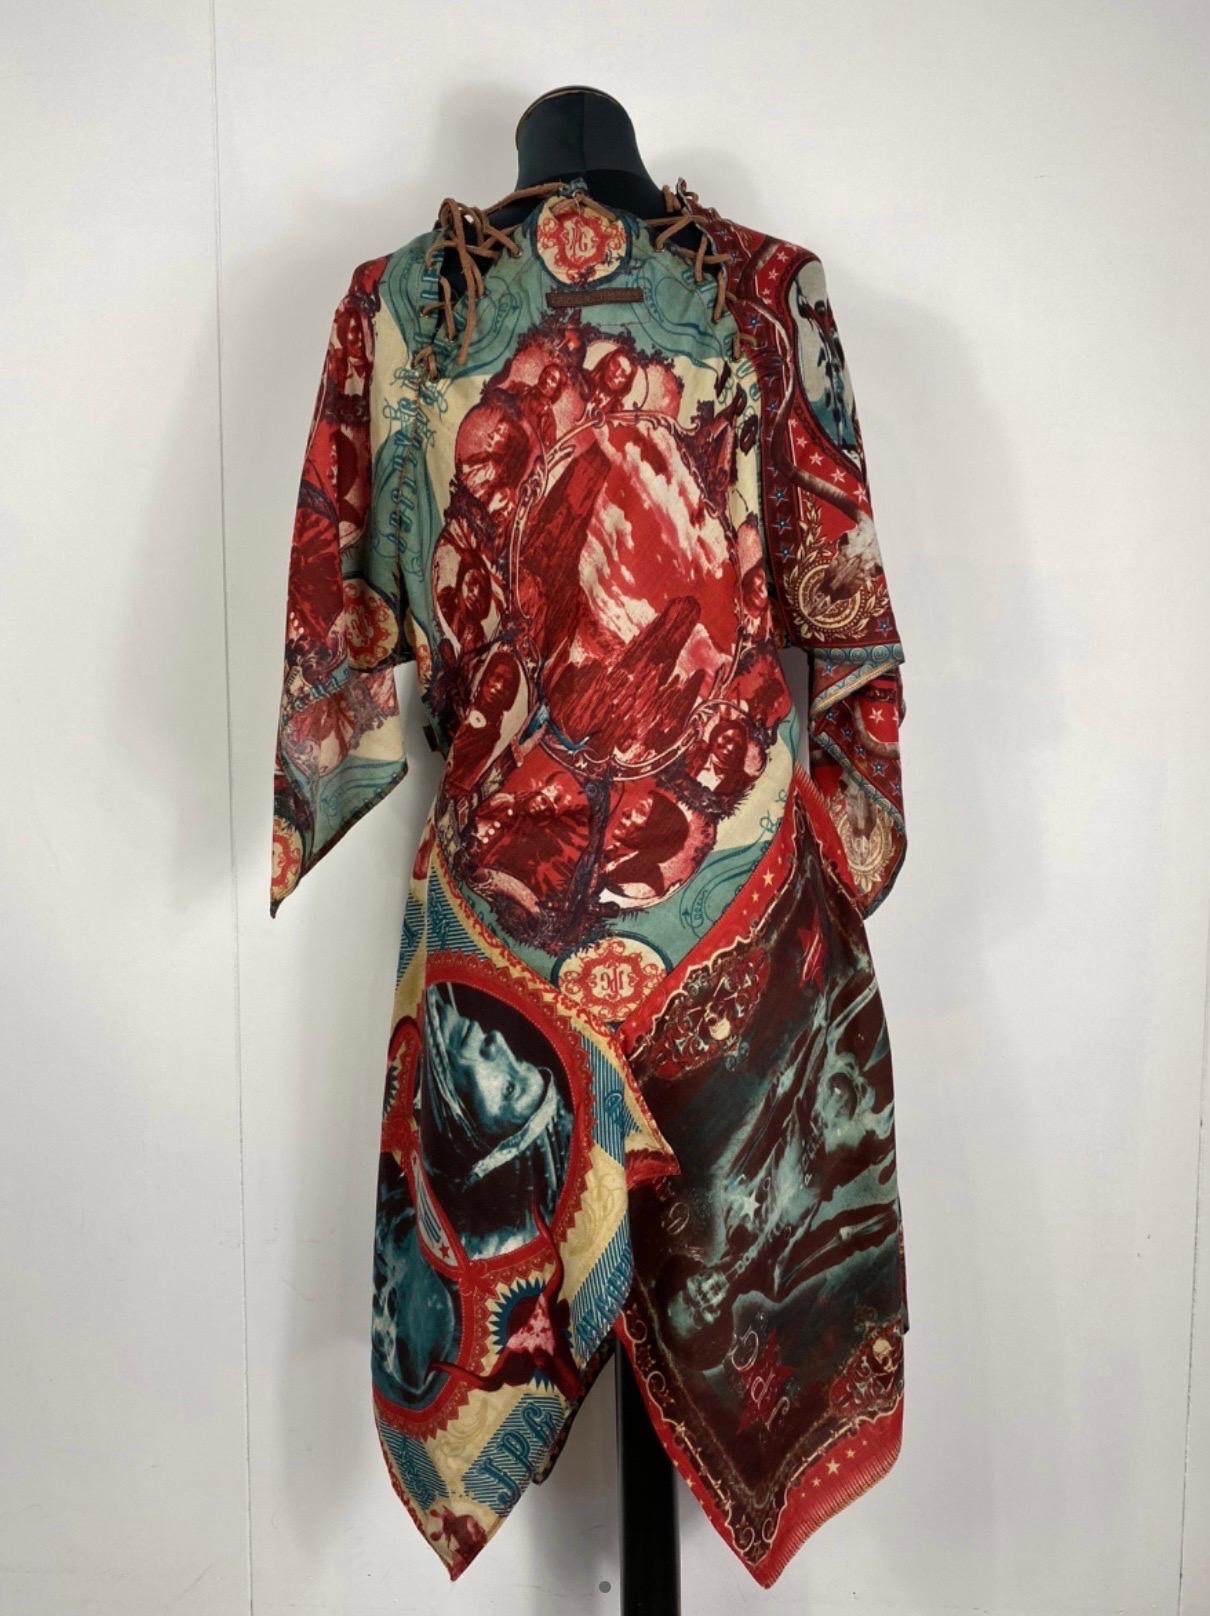 Jean Paul Gaultier jeans dress 
In 100% cotton. Amazing Native American print. Vintage piece.
size 44. Featuring various closures on the neck with leather laces.
measurements: shoulders 42cm, sleeve 58cm, length 105cm, chest 52cm. in very good